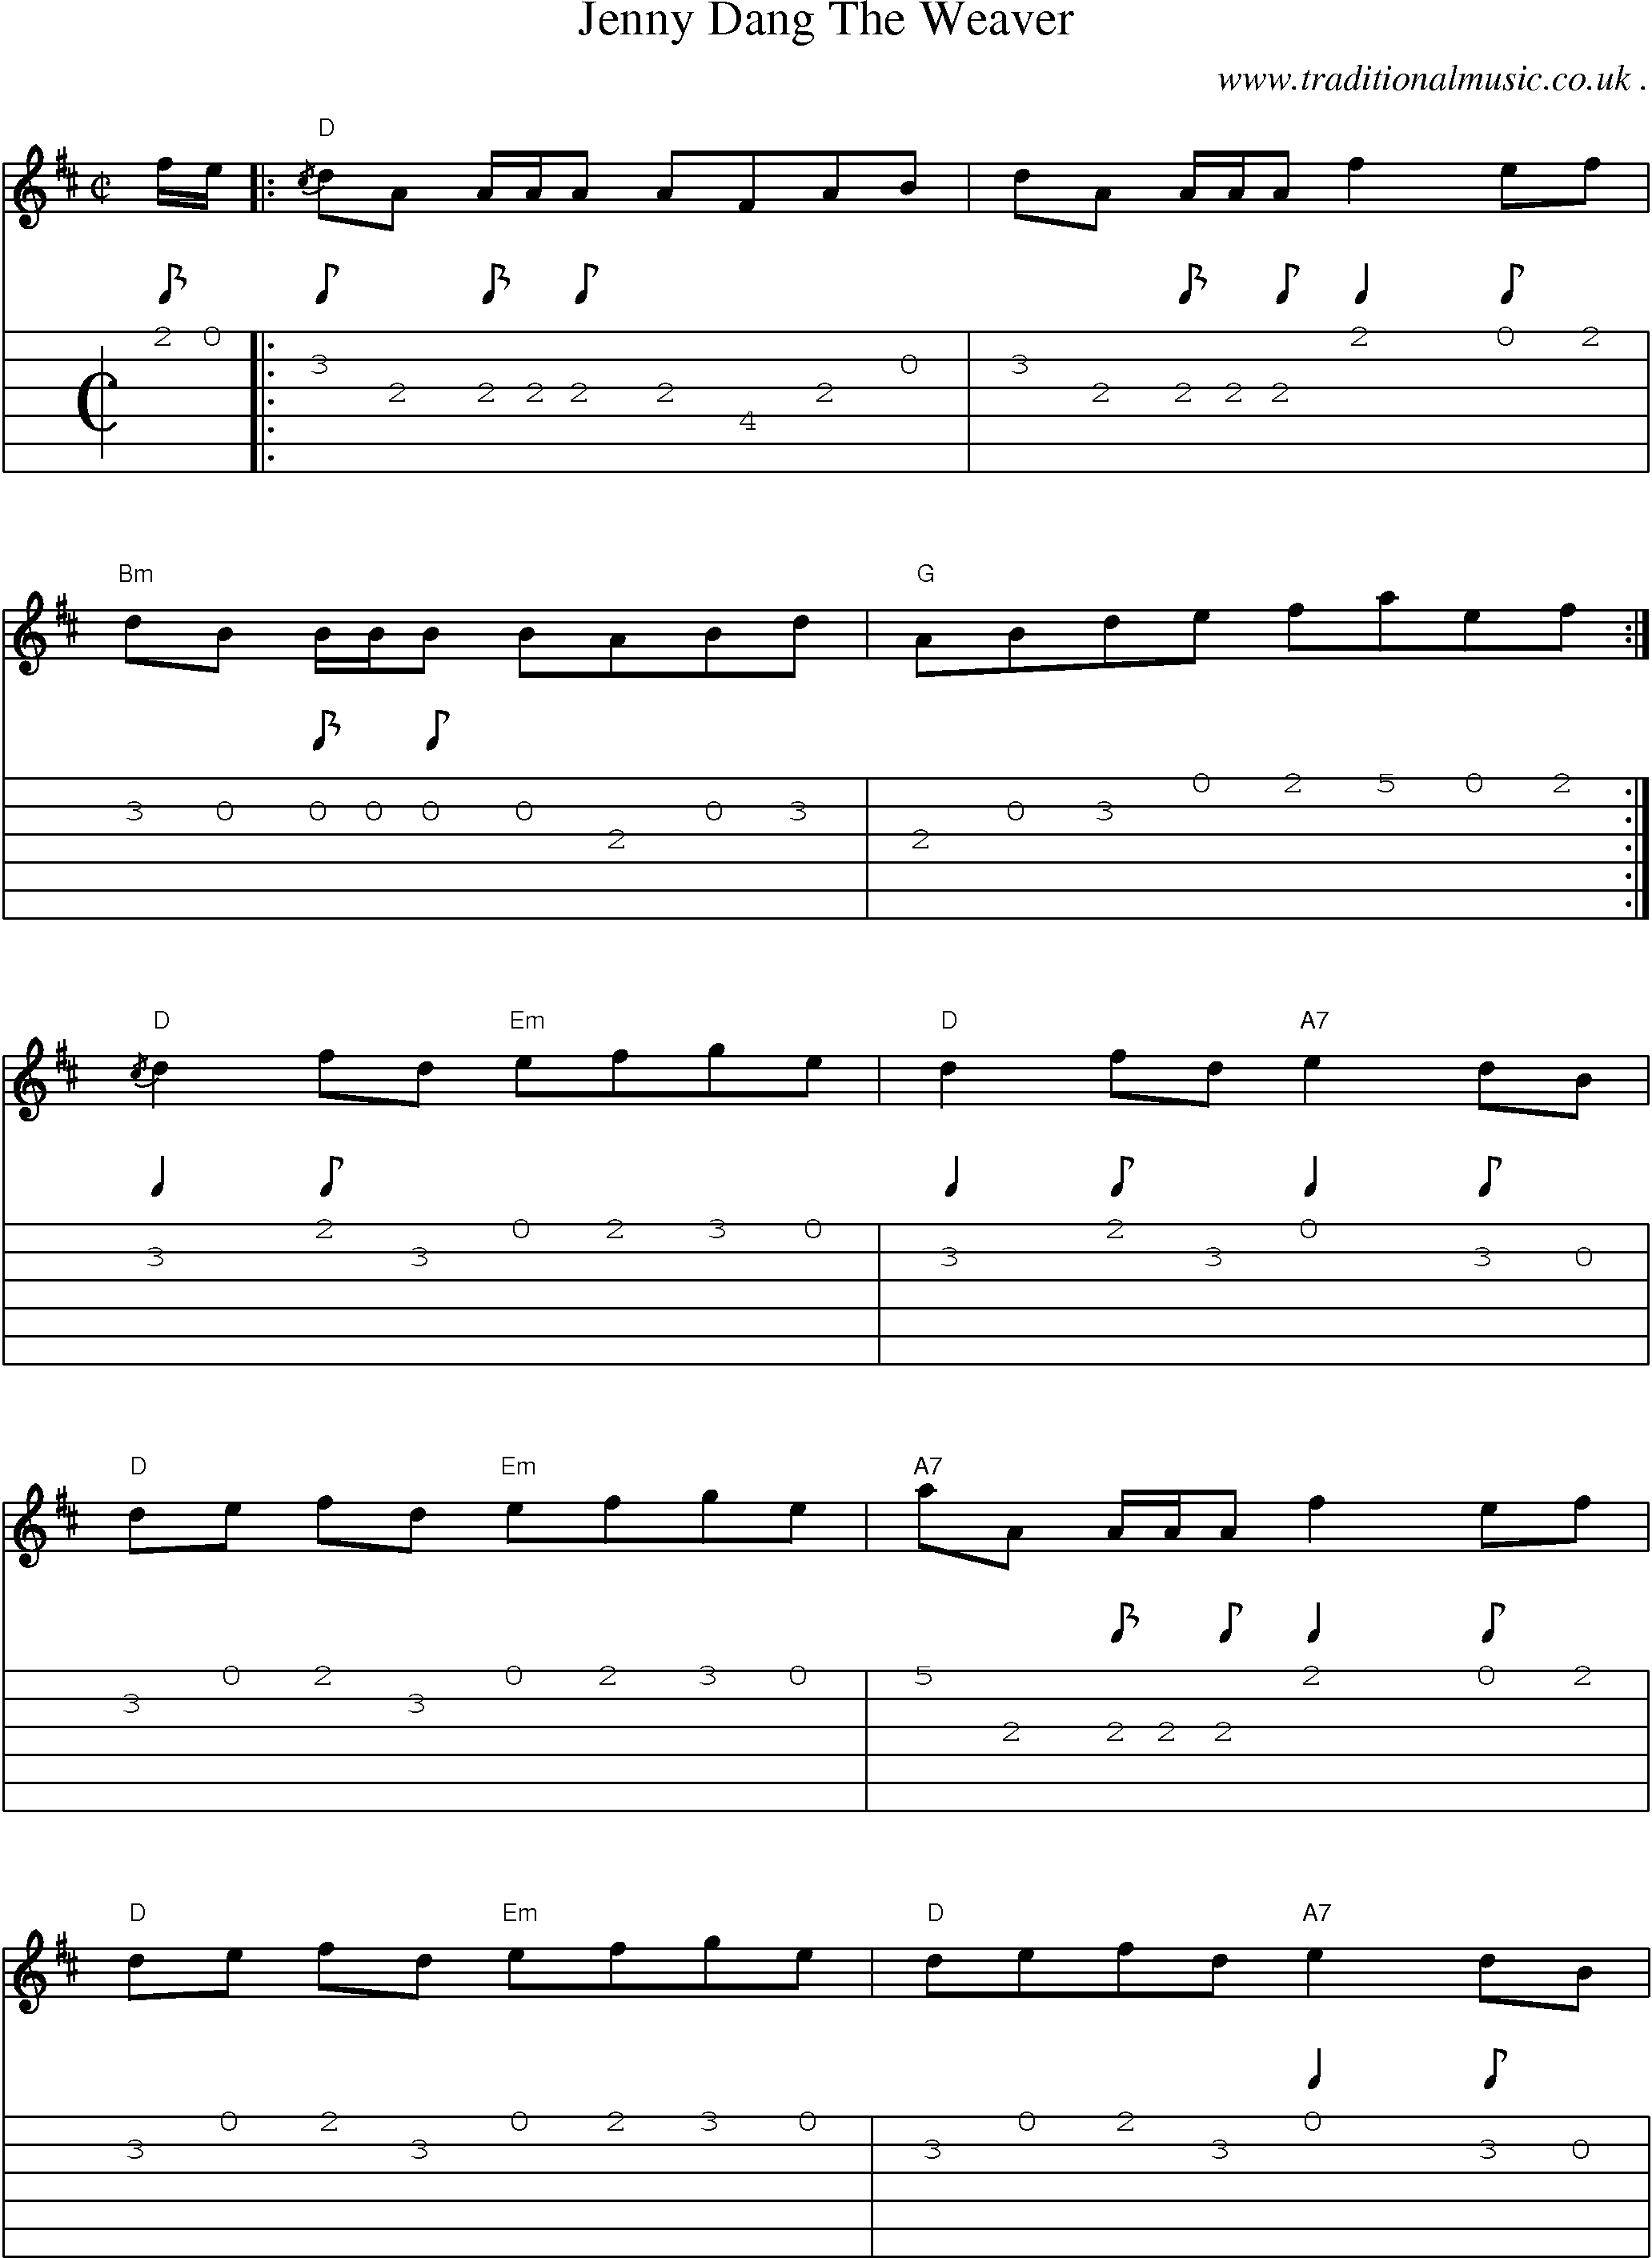 Music Score and Guitar Tabs for Jenny Dang The Weaver